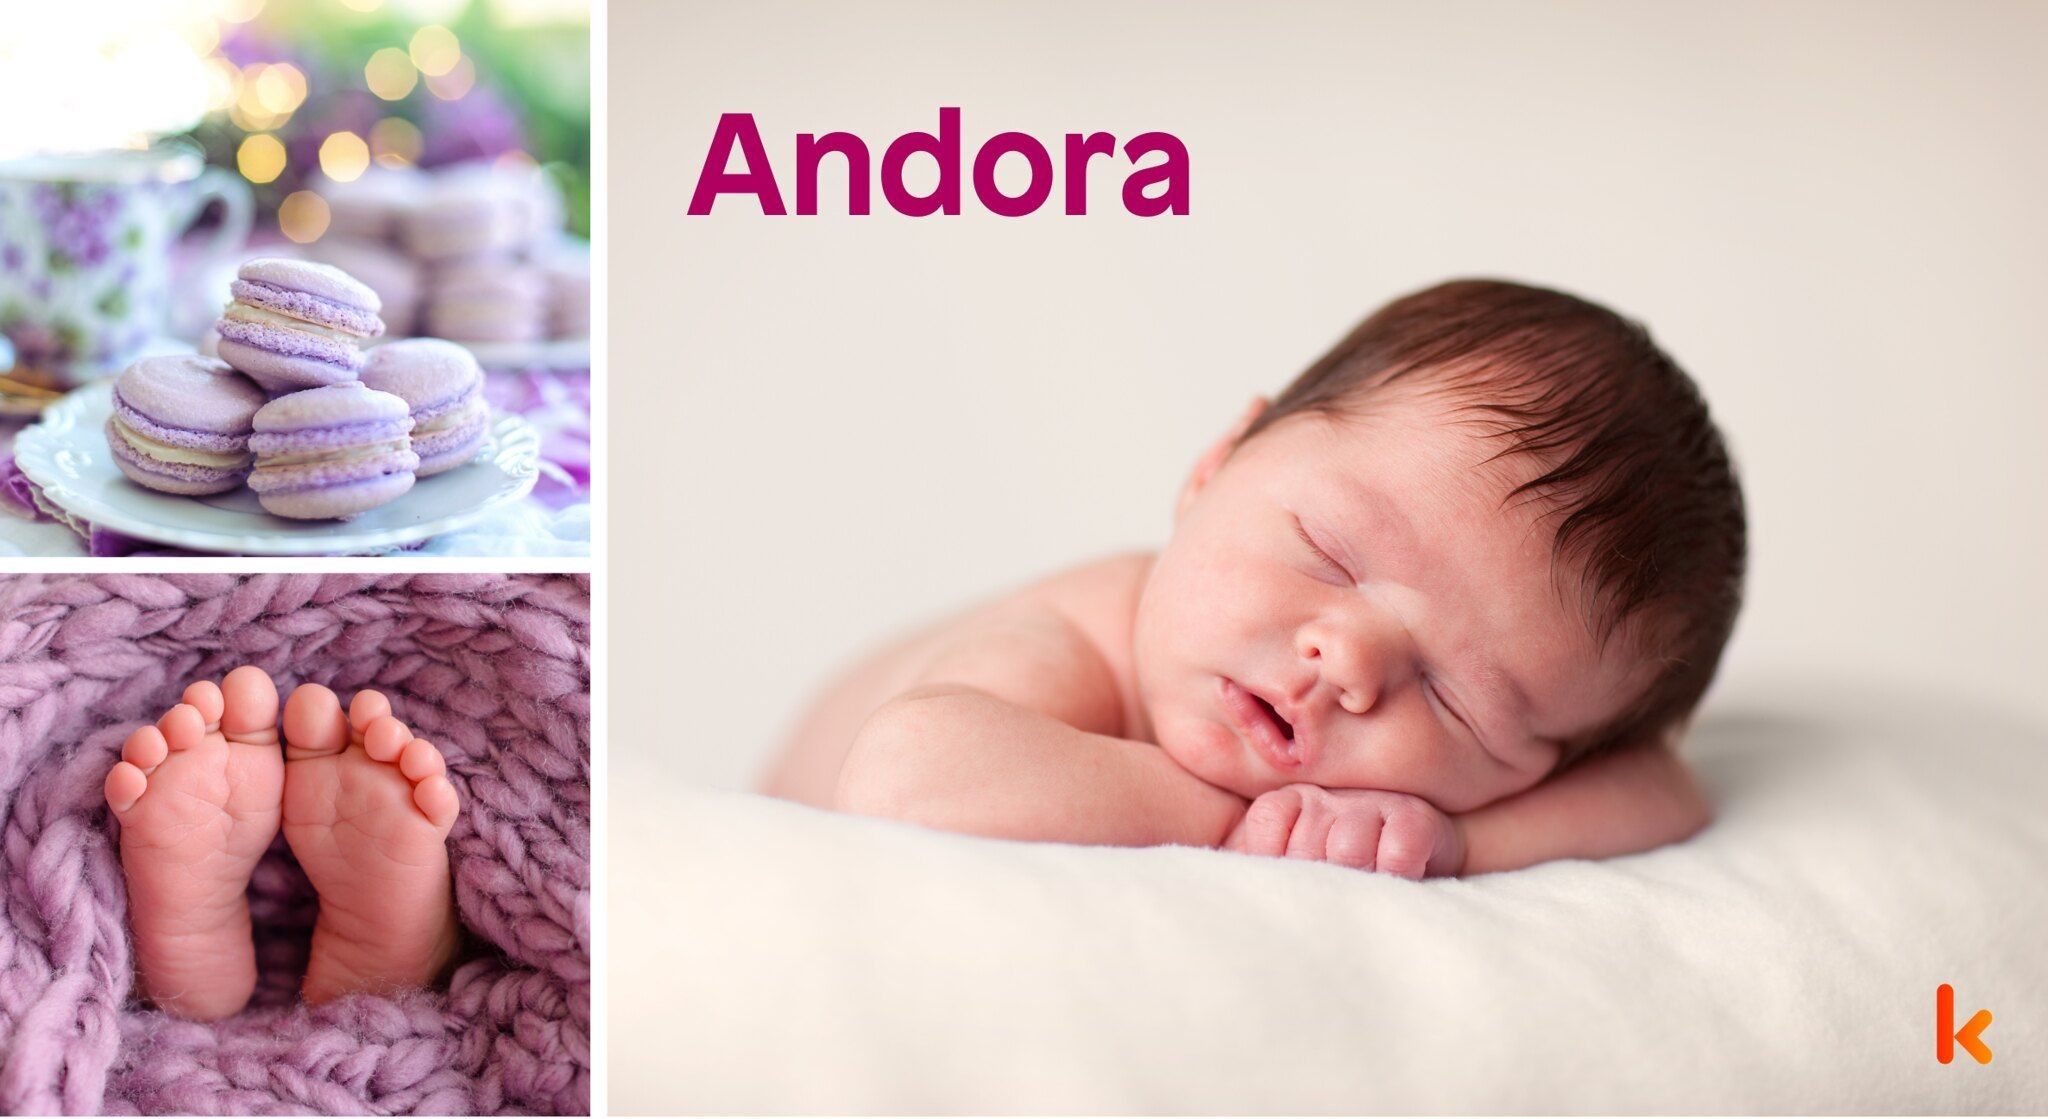 Meaning of the name Andora